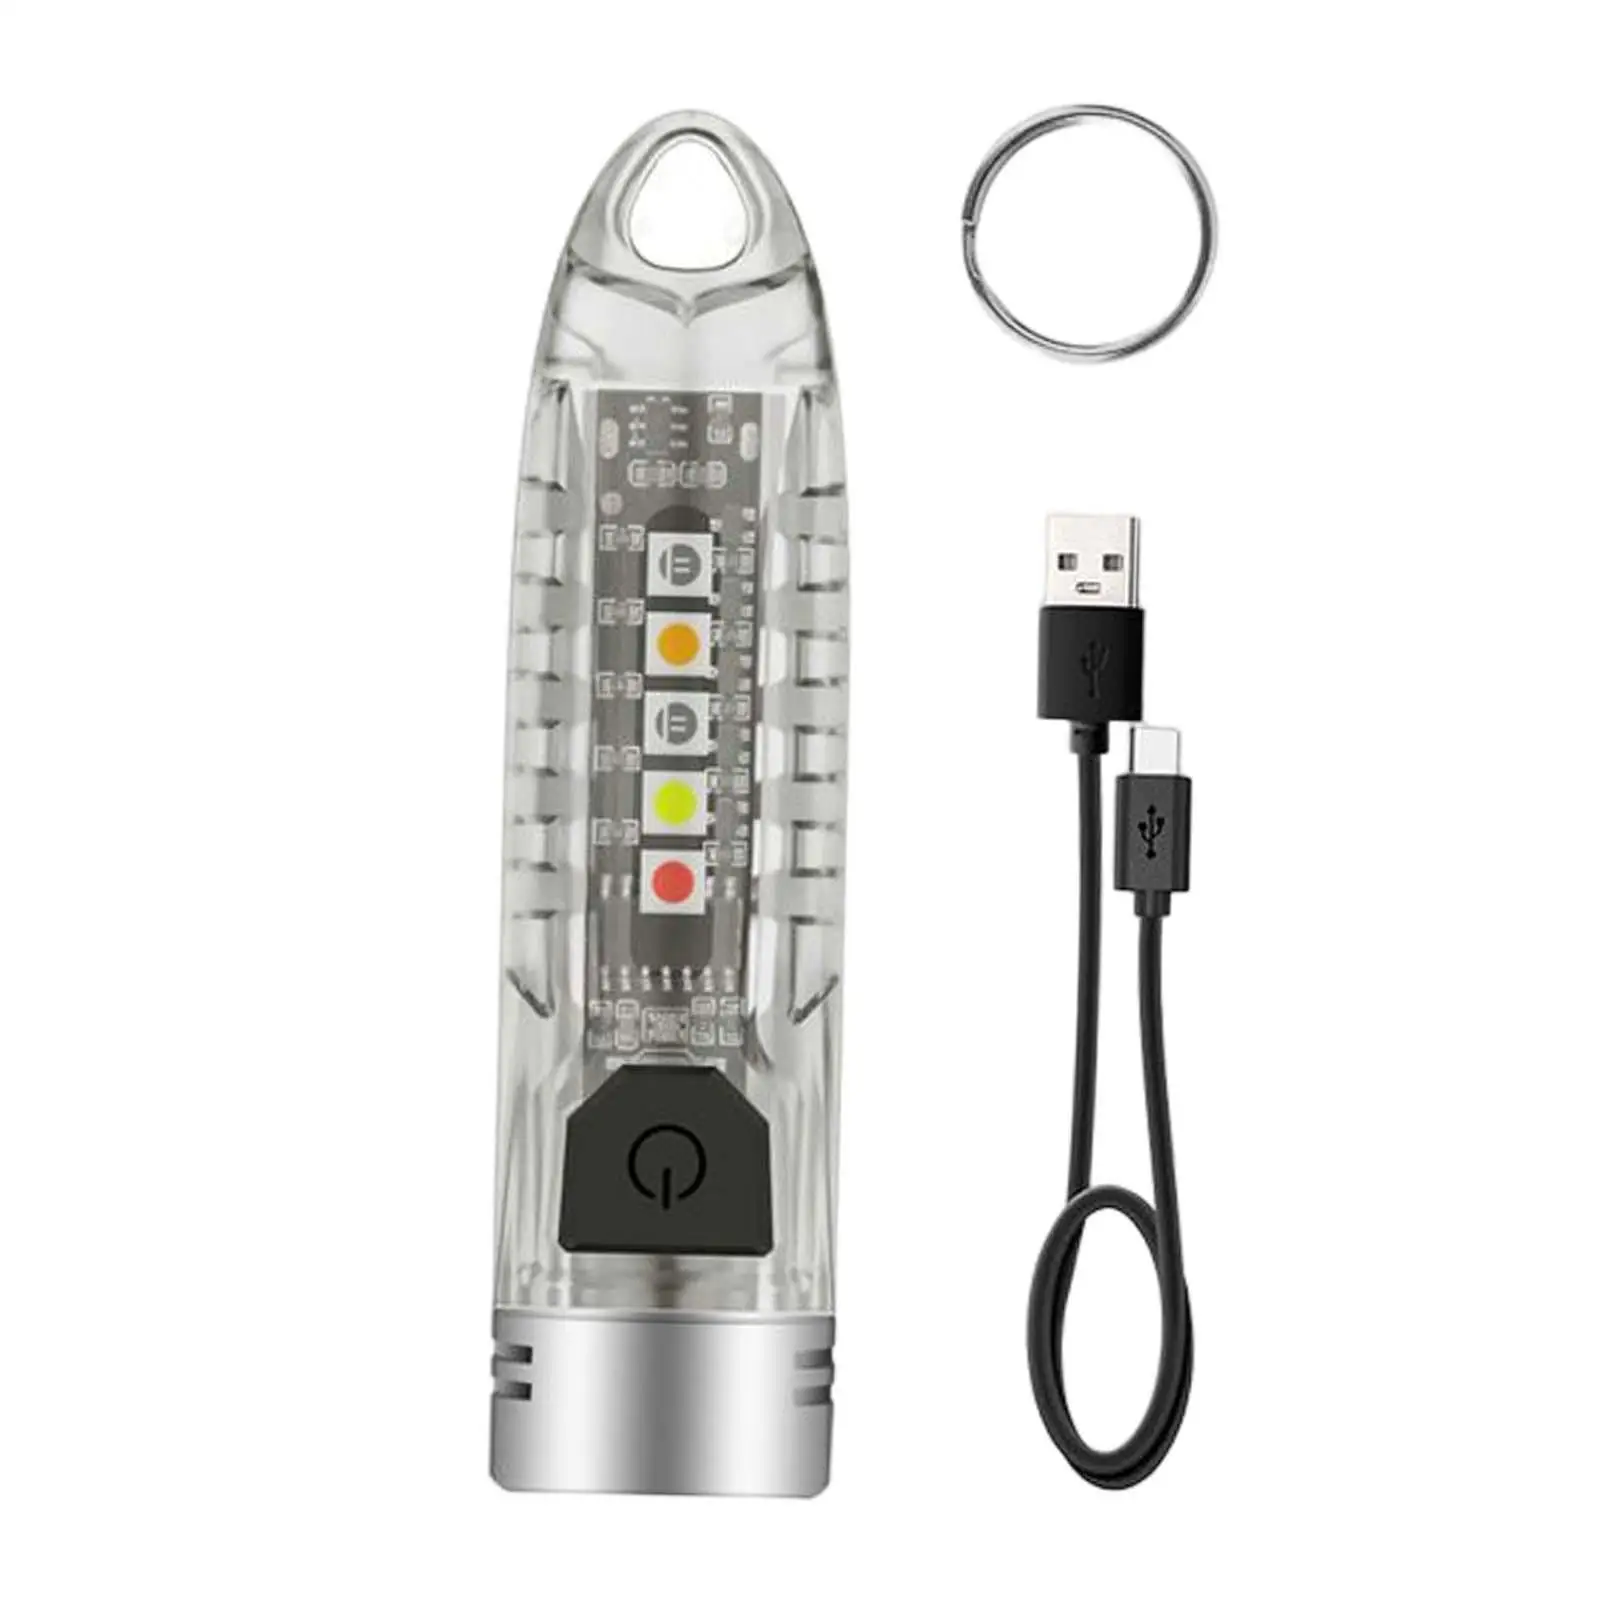 LED Torch Light Waterproof and 12 Modes 400 Lumens with Key Chain Mini Flashlight for Daily Using Camping Backpacking Hiking